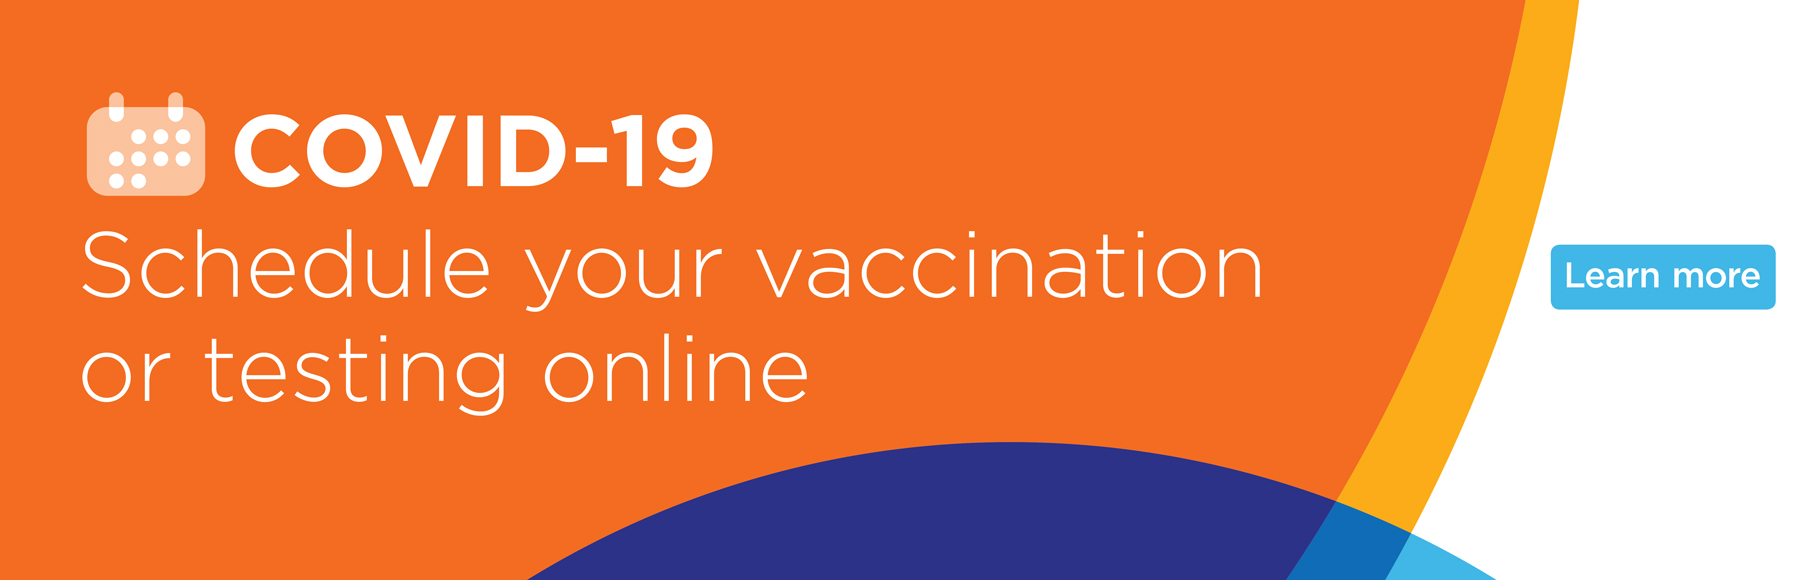 COVID-19: schedule your vaccination or testing online